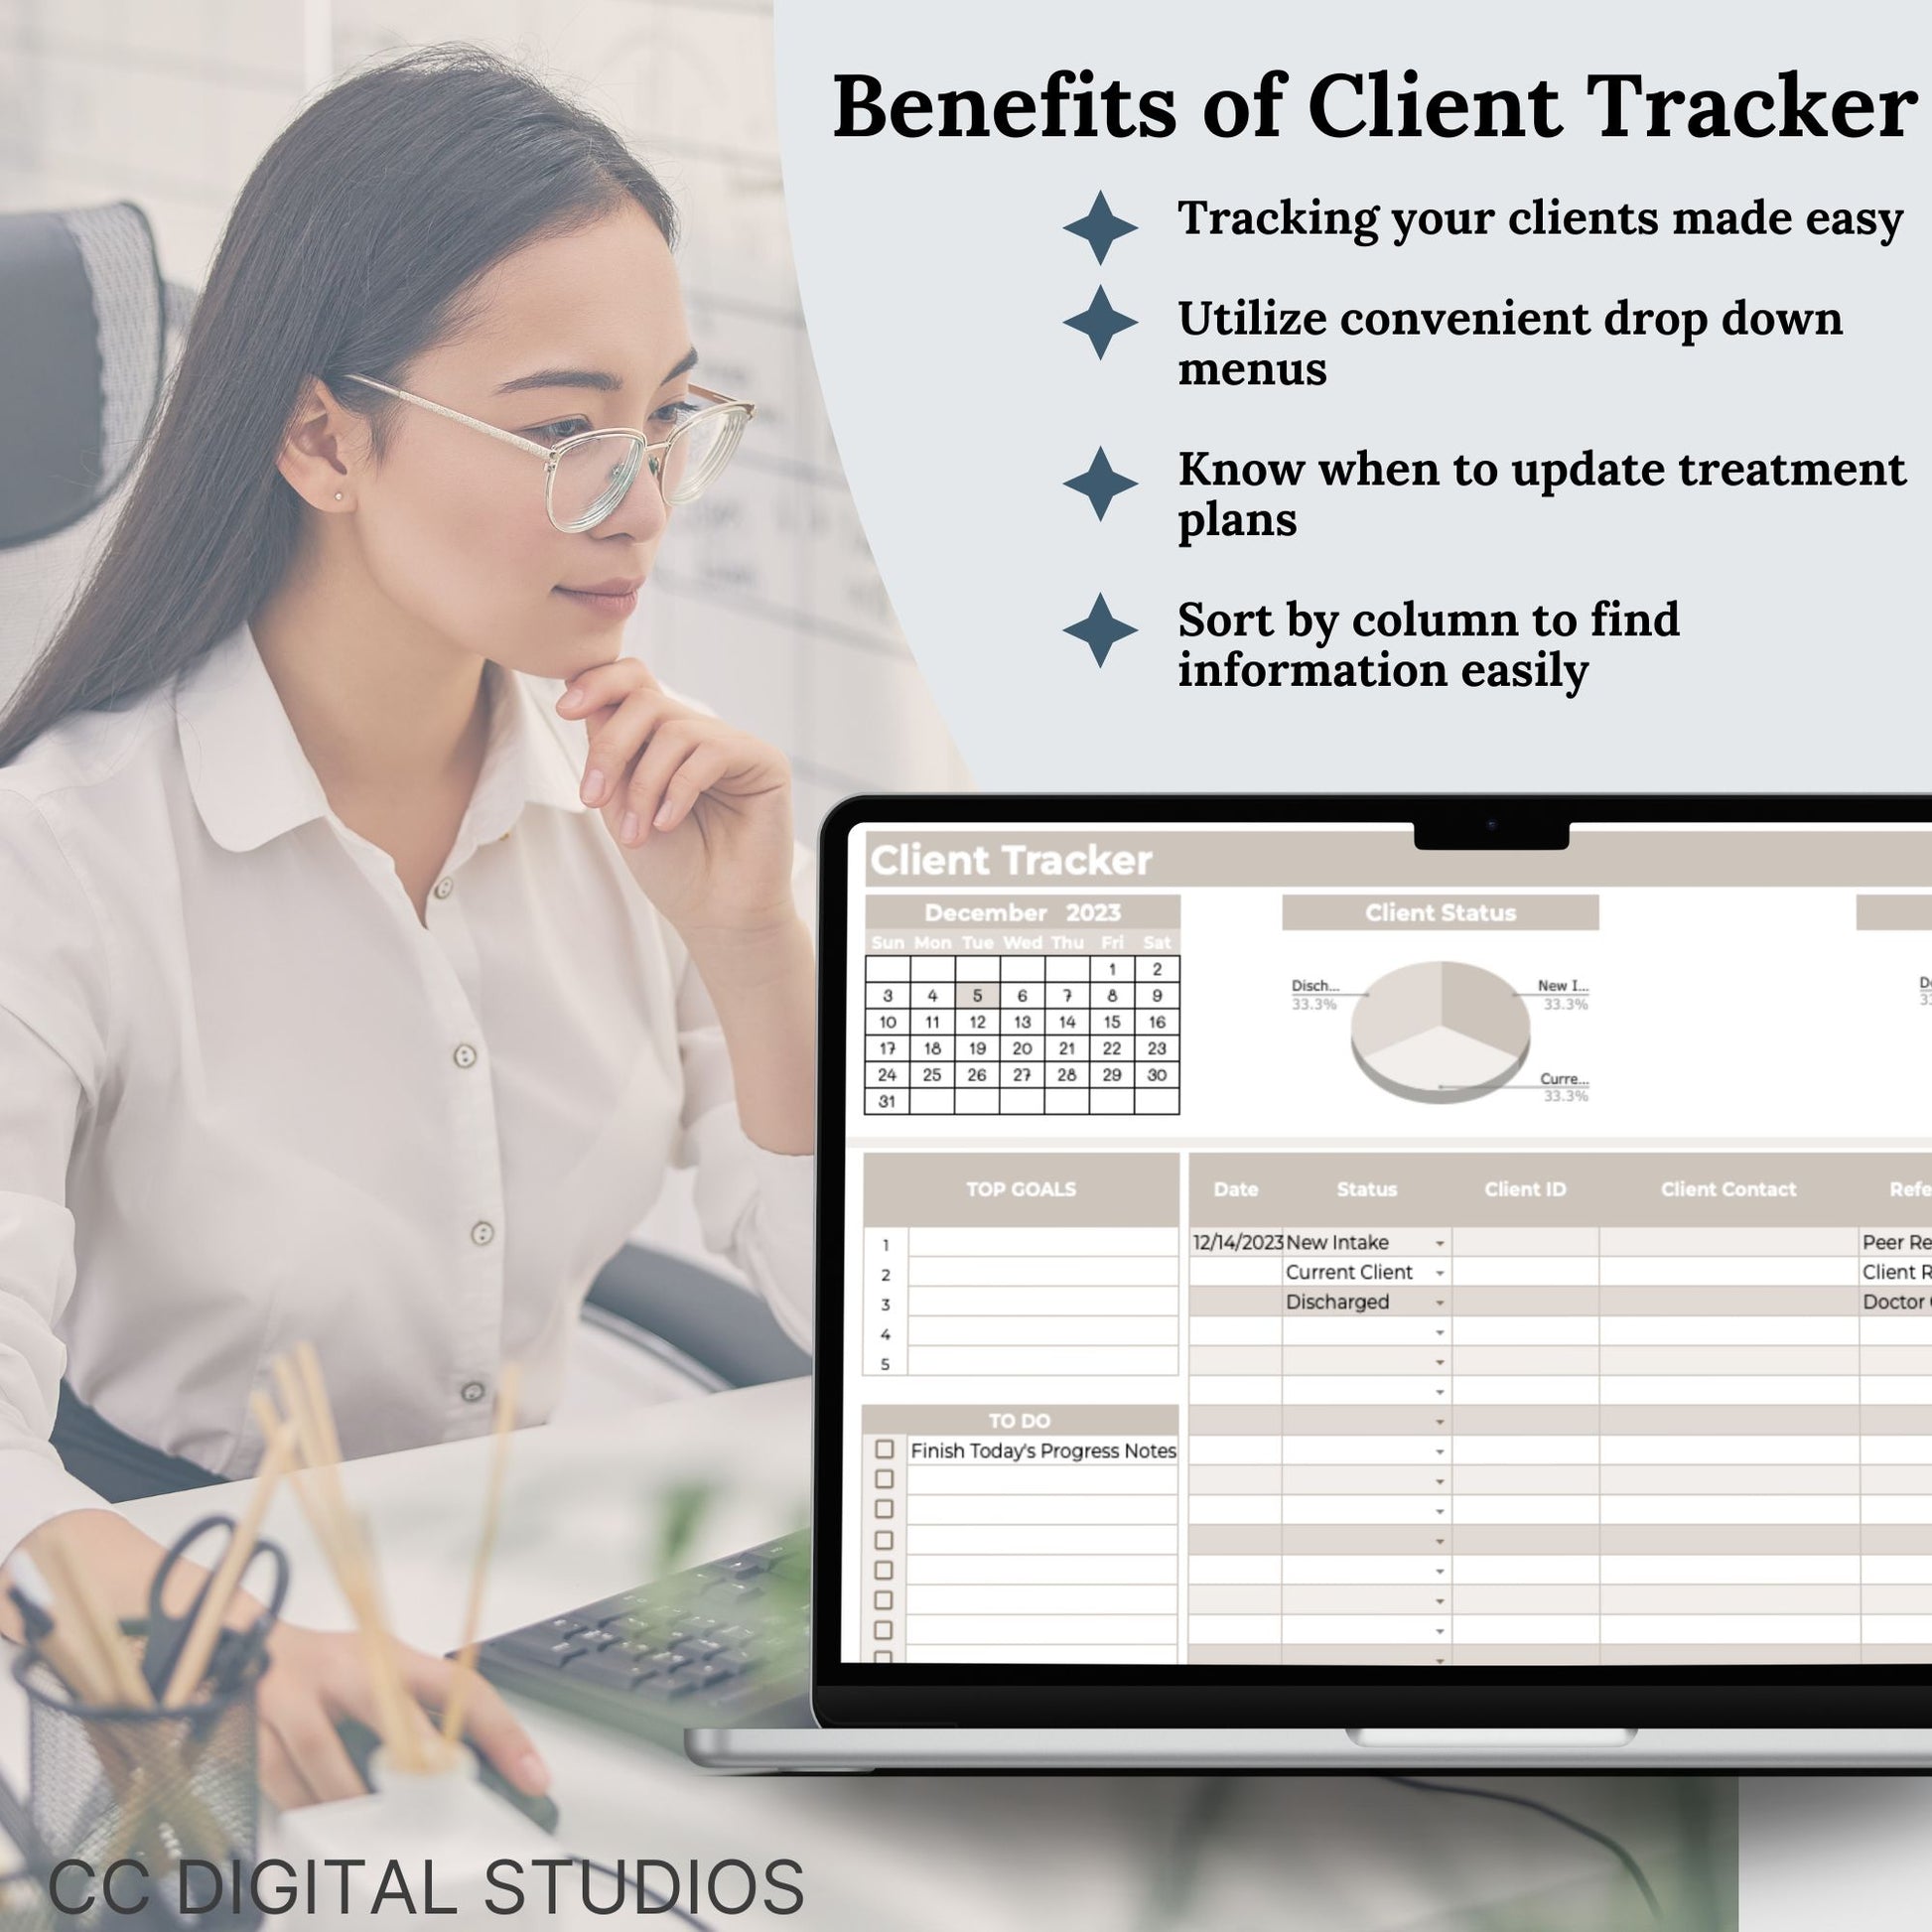 Client Tracker for Google Sheets document is tailored for mental health professionals to efficiently manage their client caseload. This client tracker is designed to streamline the workflow of therapists in private practice or counseling offices, offering a centralized platform for client session tracking and management.